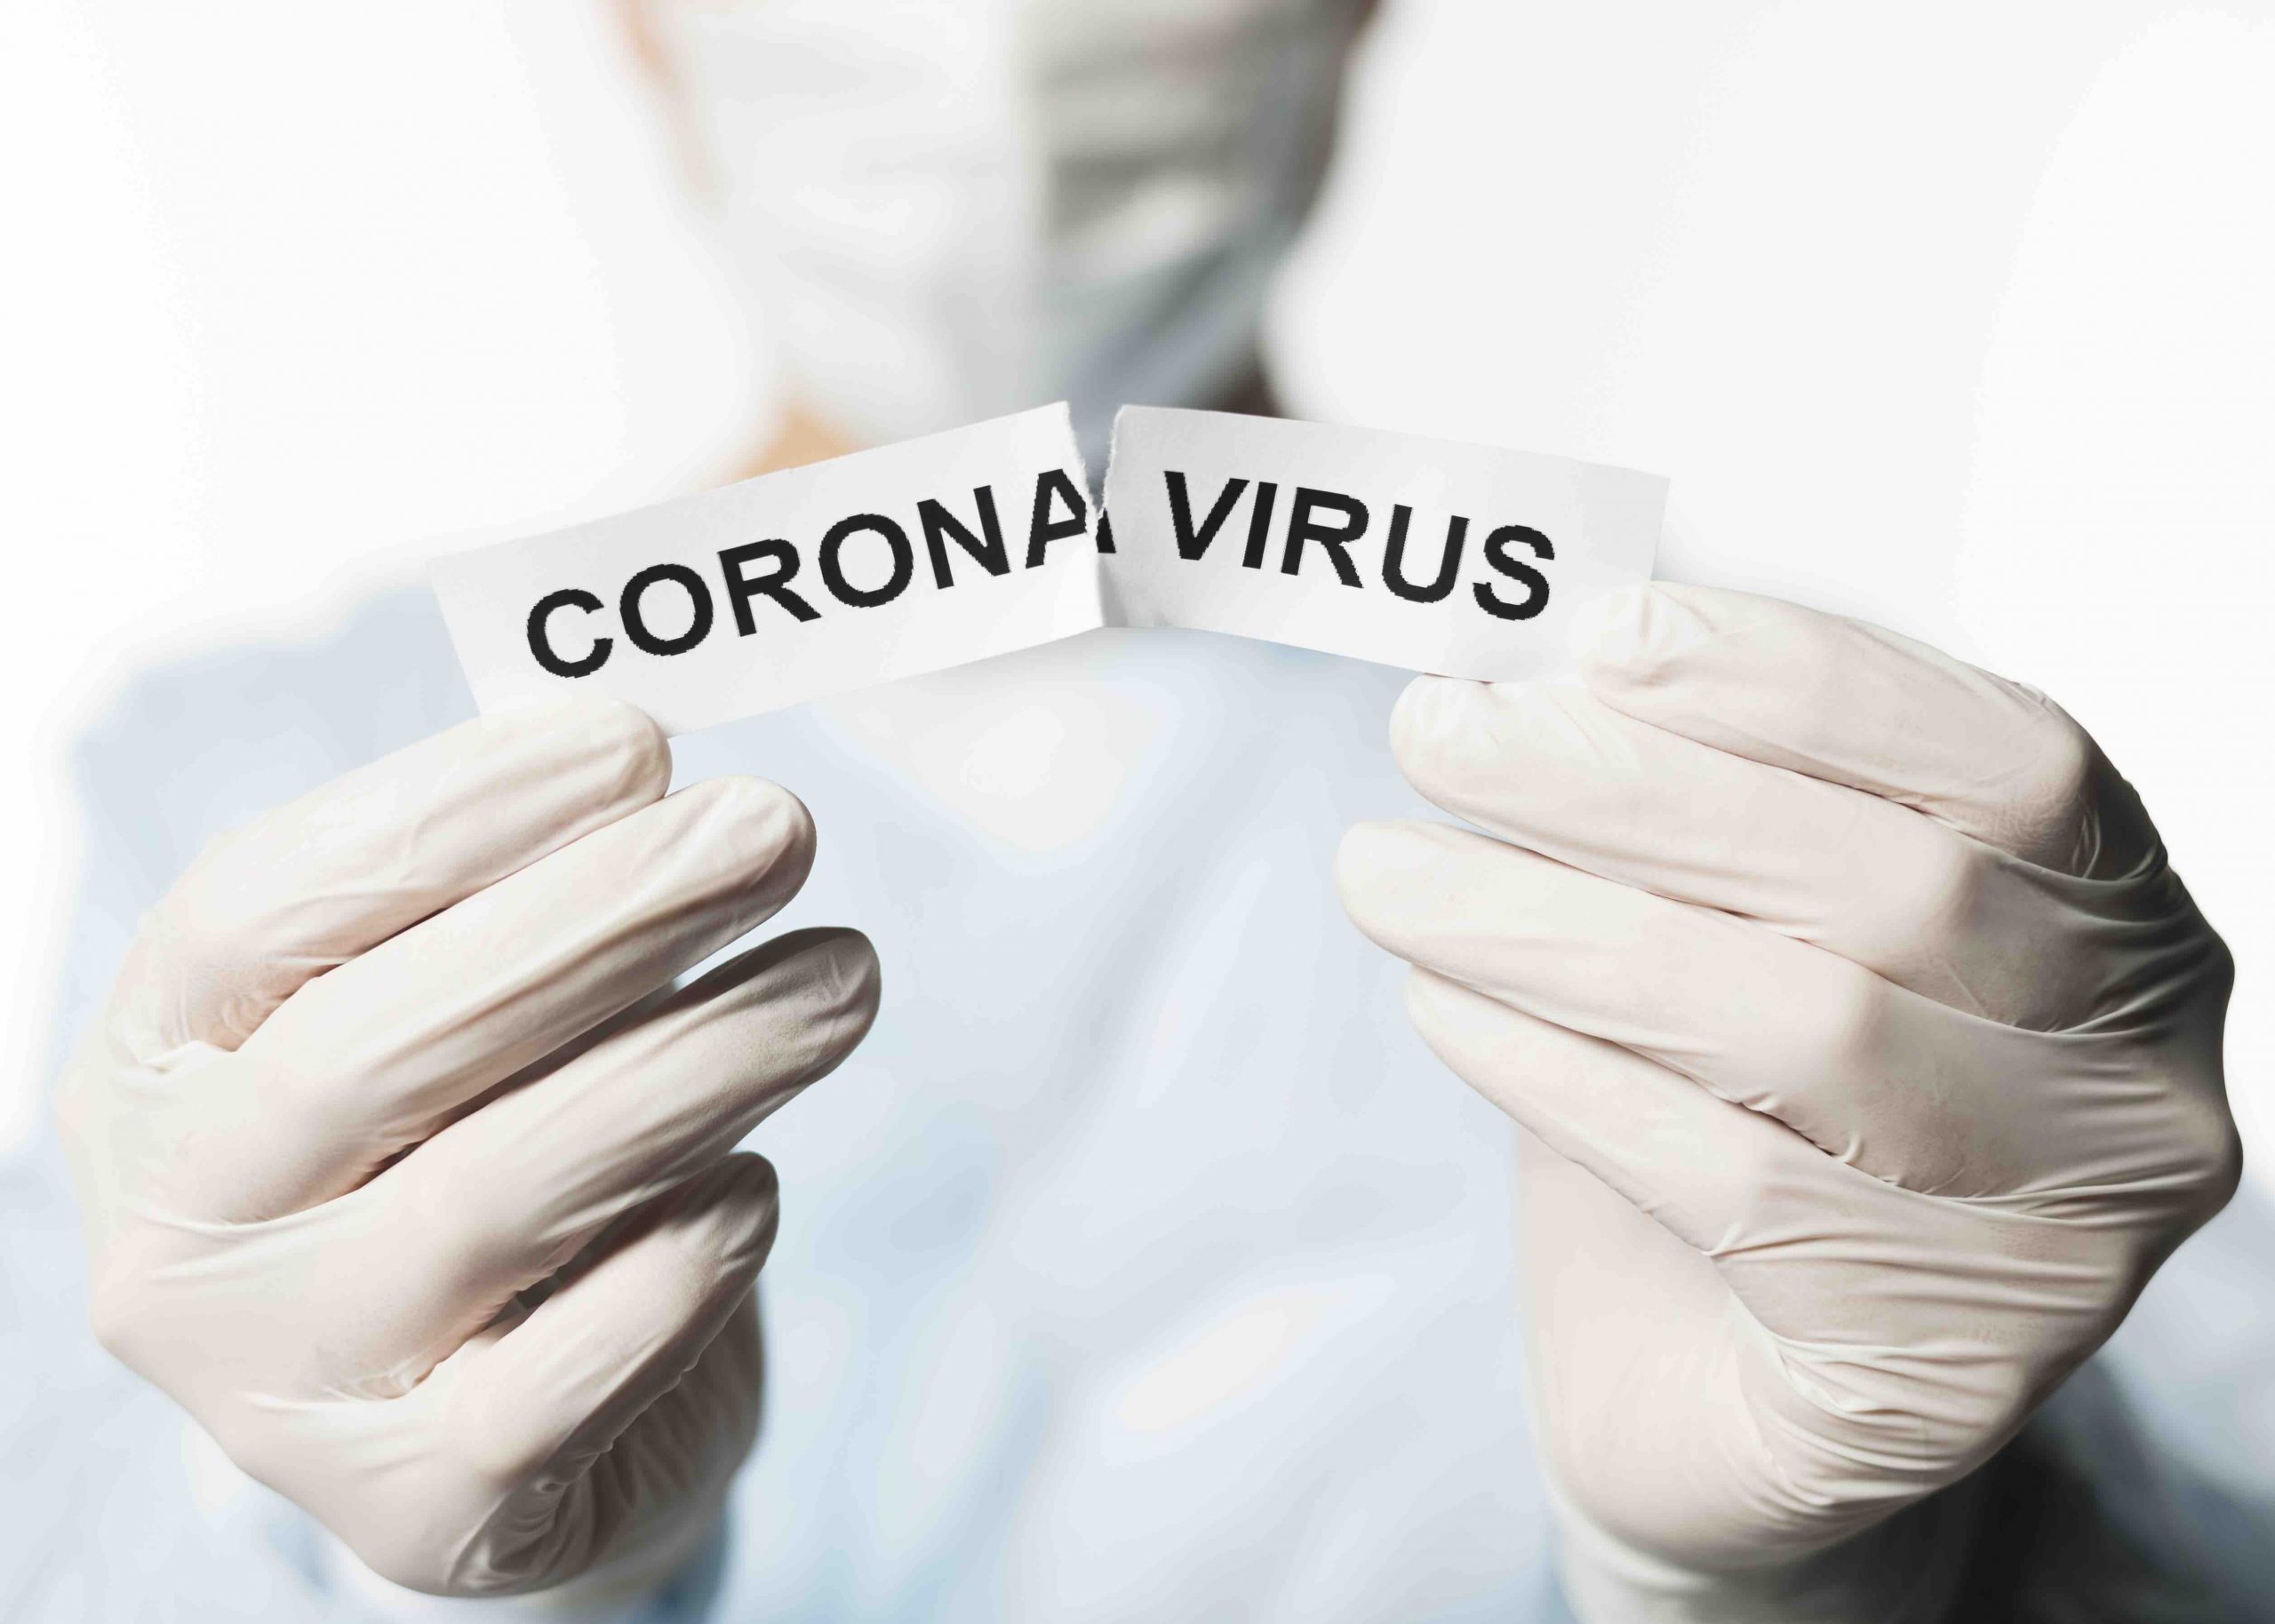 Corona Virus: The effect on Business Travel and how to stay safe as a passenger